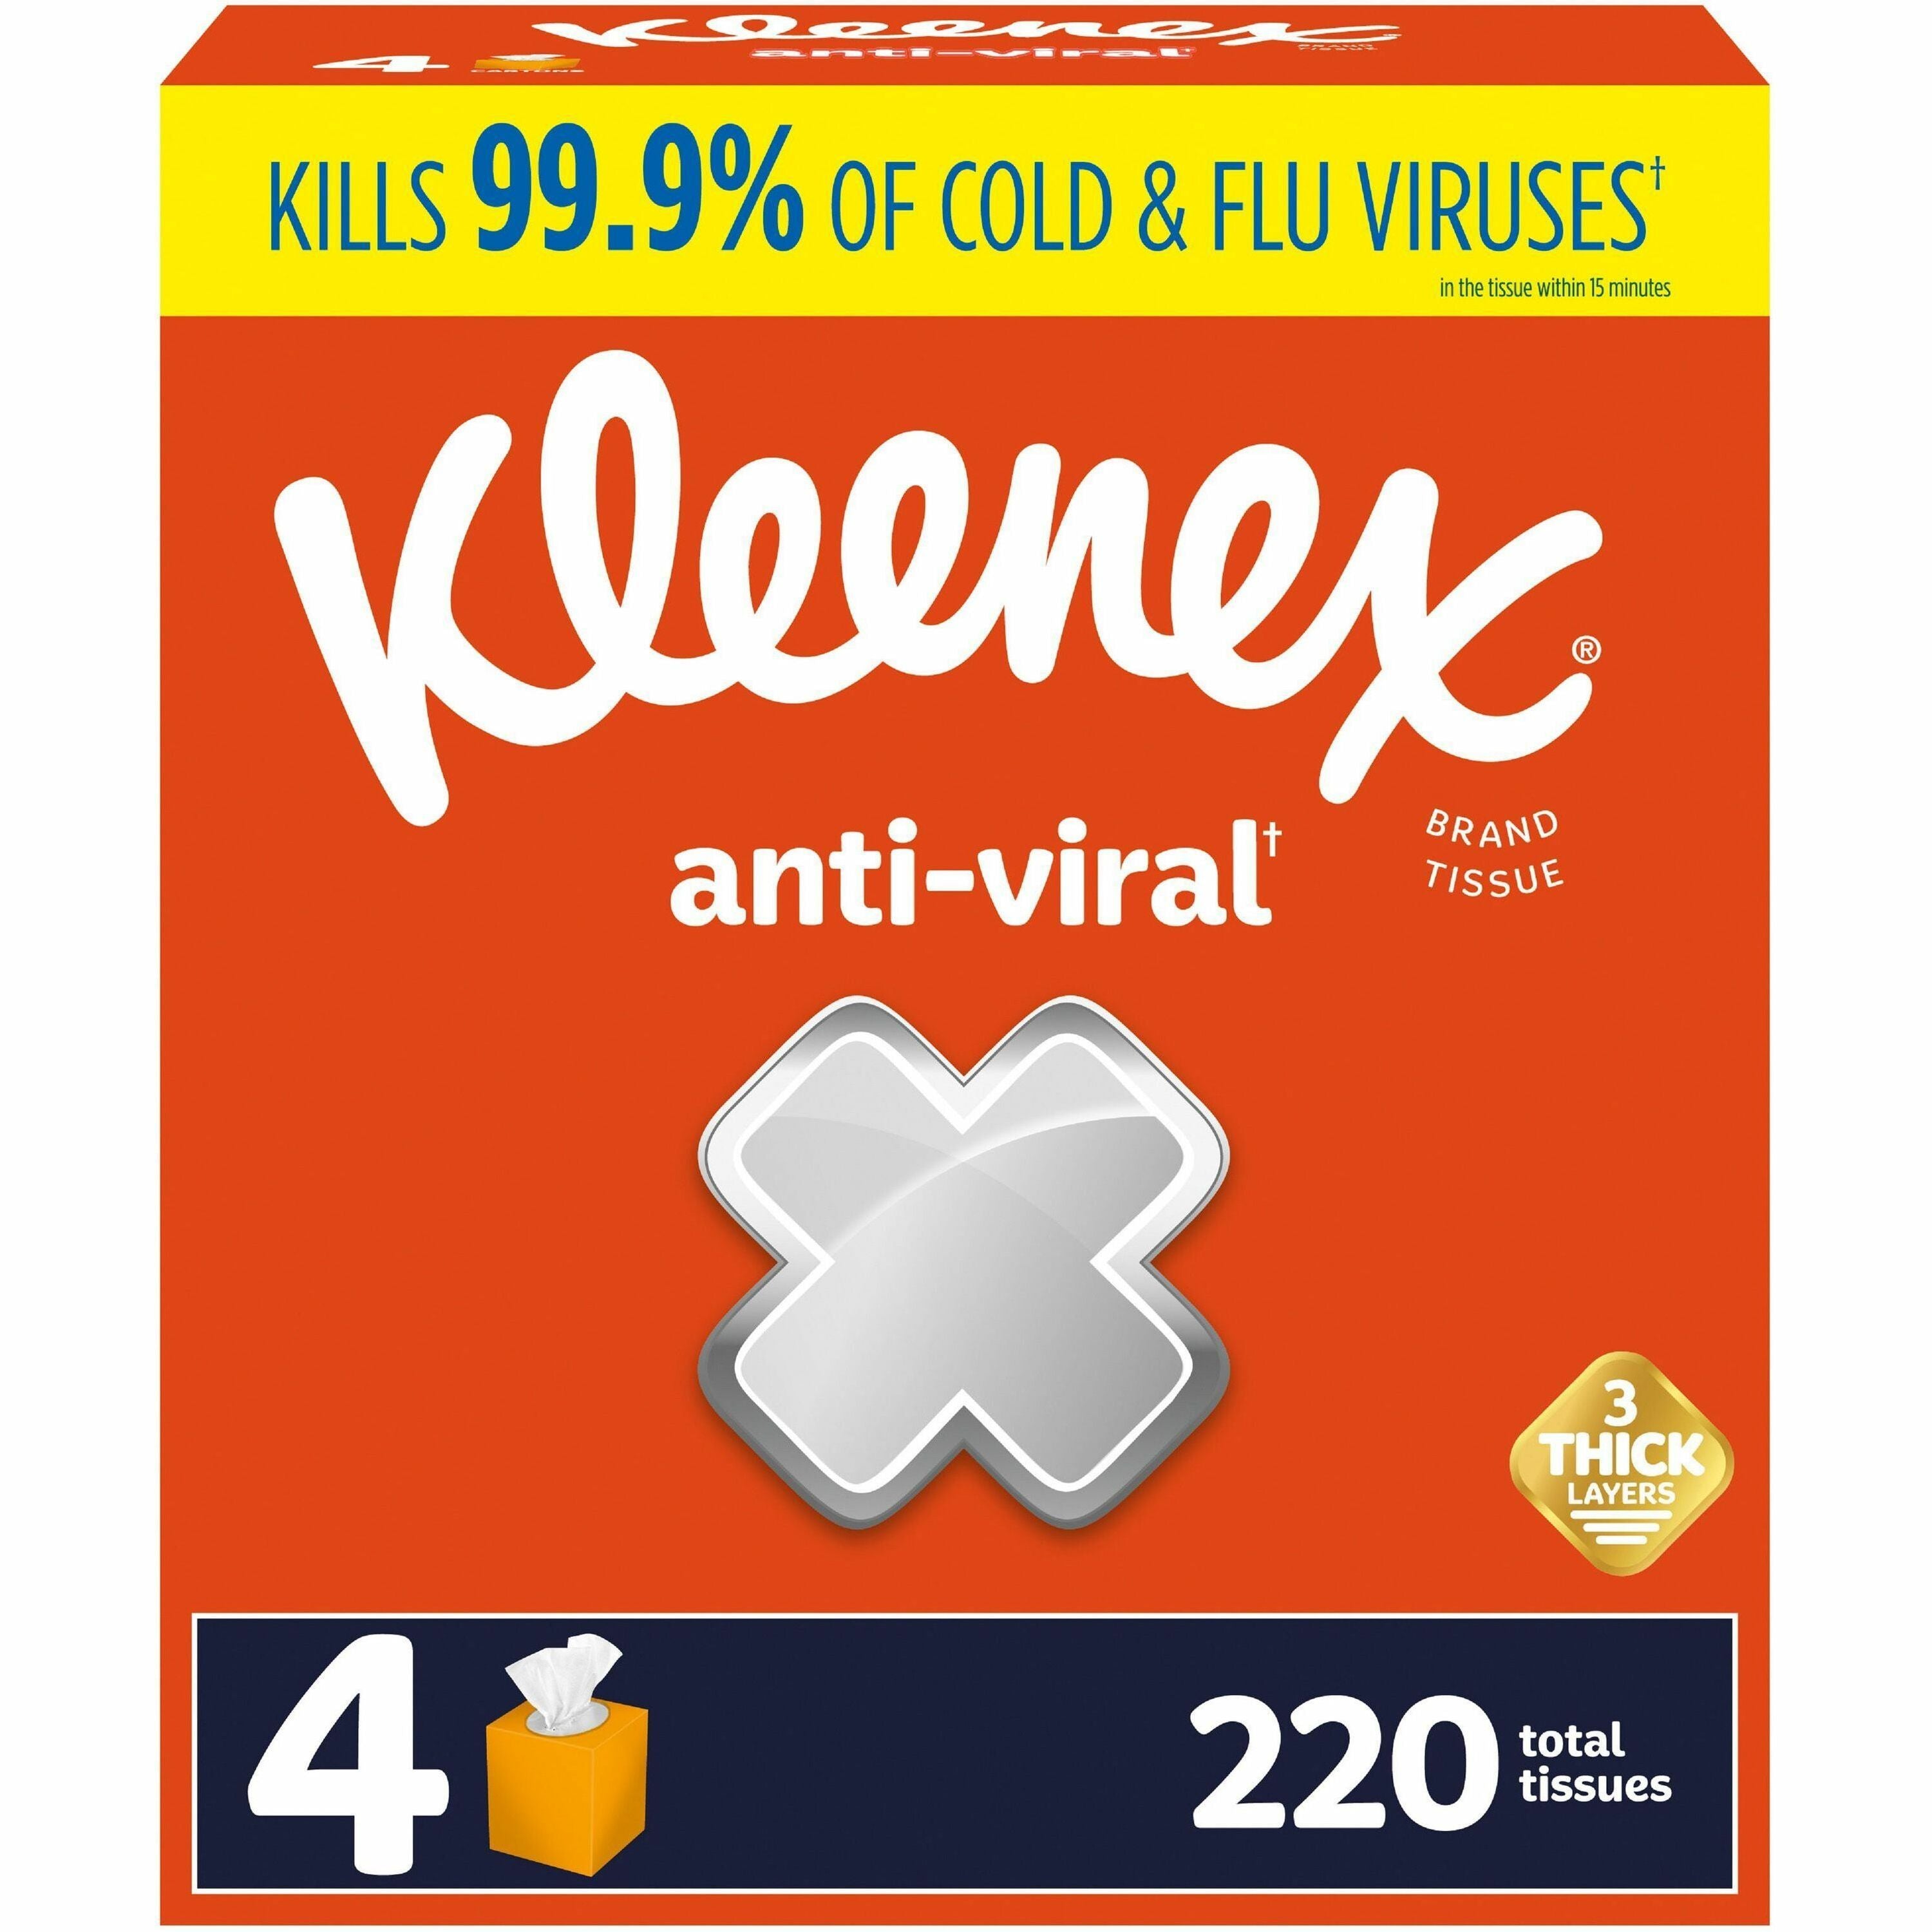 kleenex-anti-viral-facial-tissue-3-ply-white-anti-viral-soft-for-face-business-commercial-55-per-box-4-pack_kcc54506 - 1